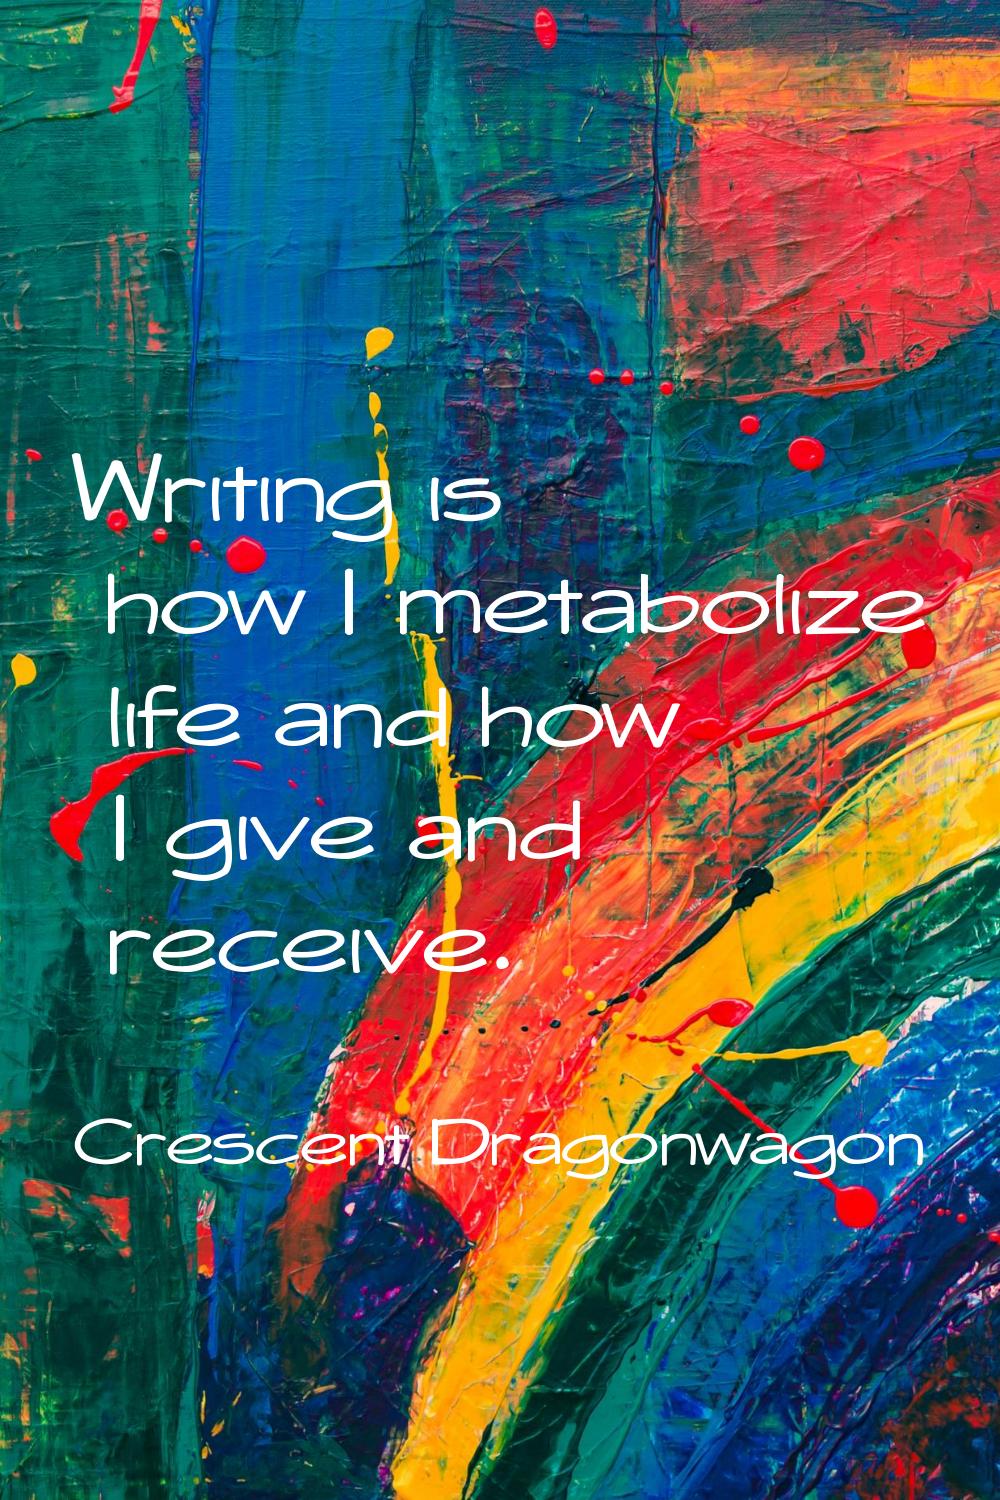 Writing is how I metabolize life and how I give and receive.